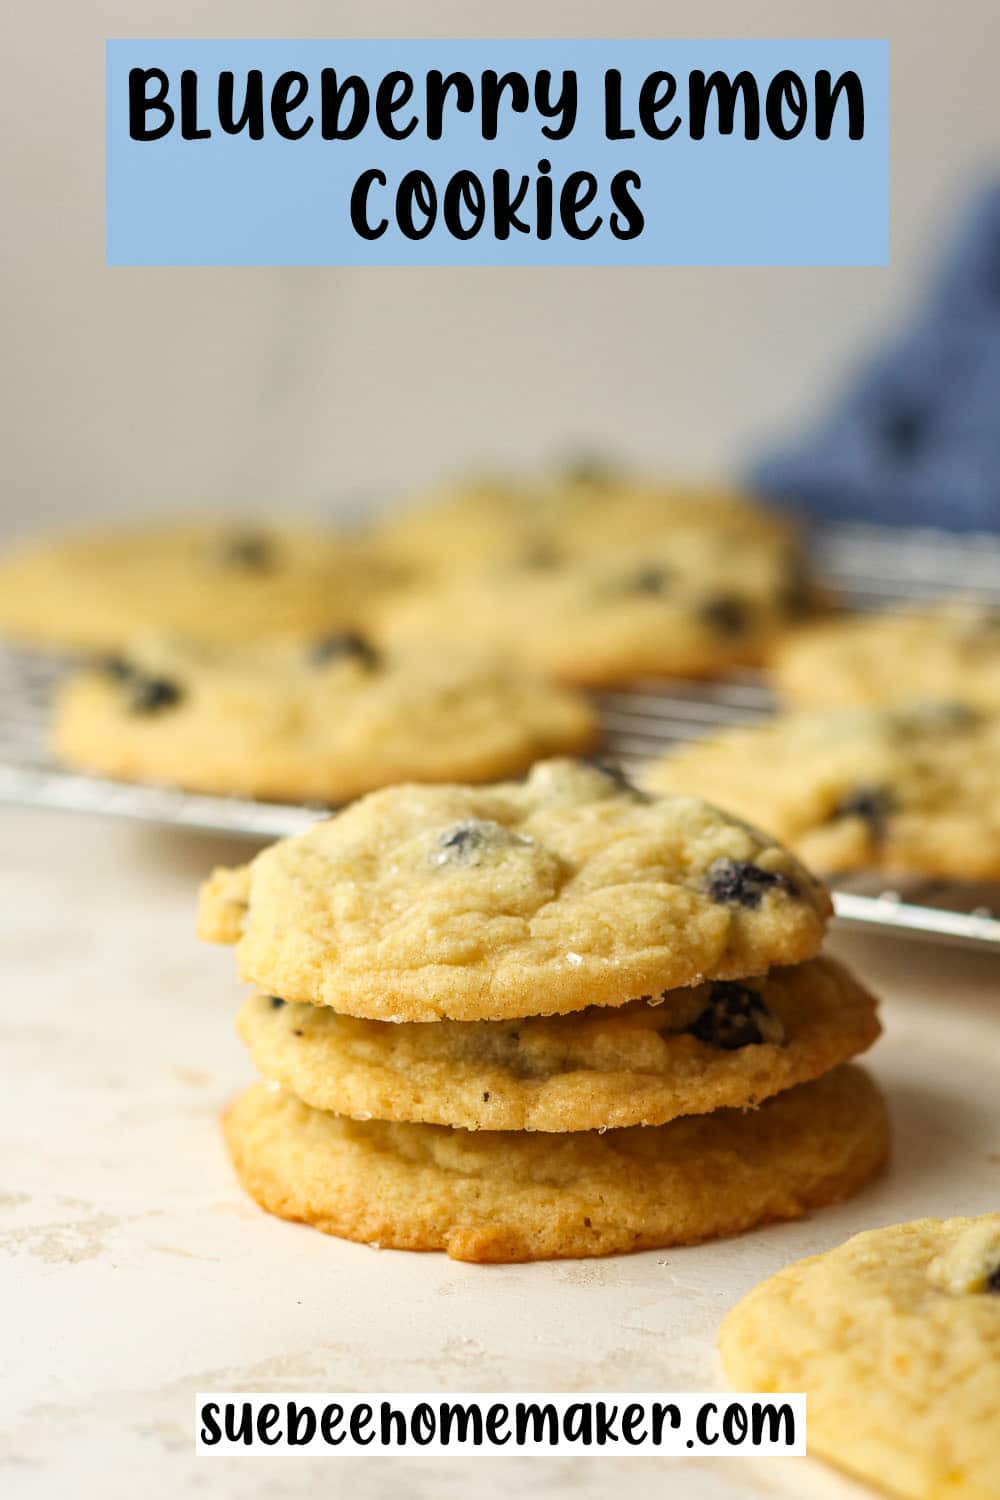 A stack of three blueberry lemon cookies.